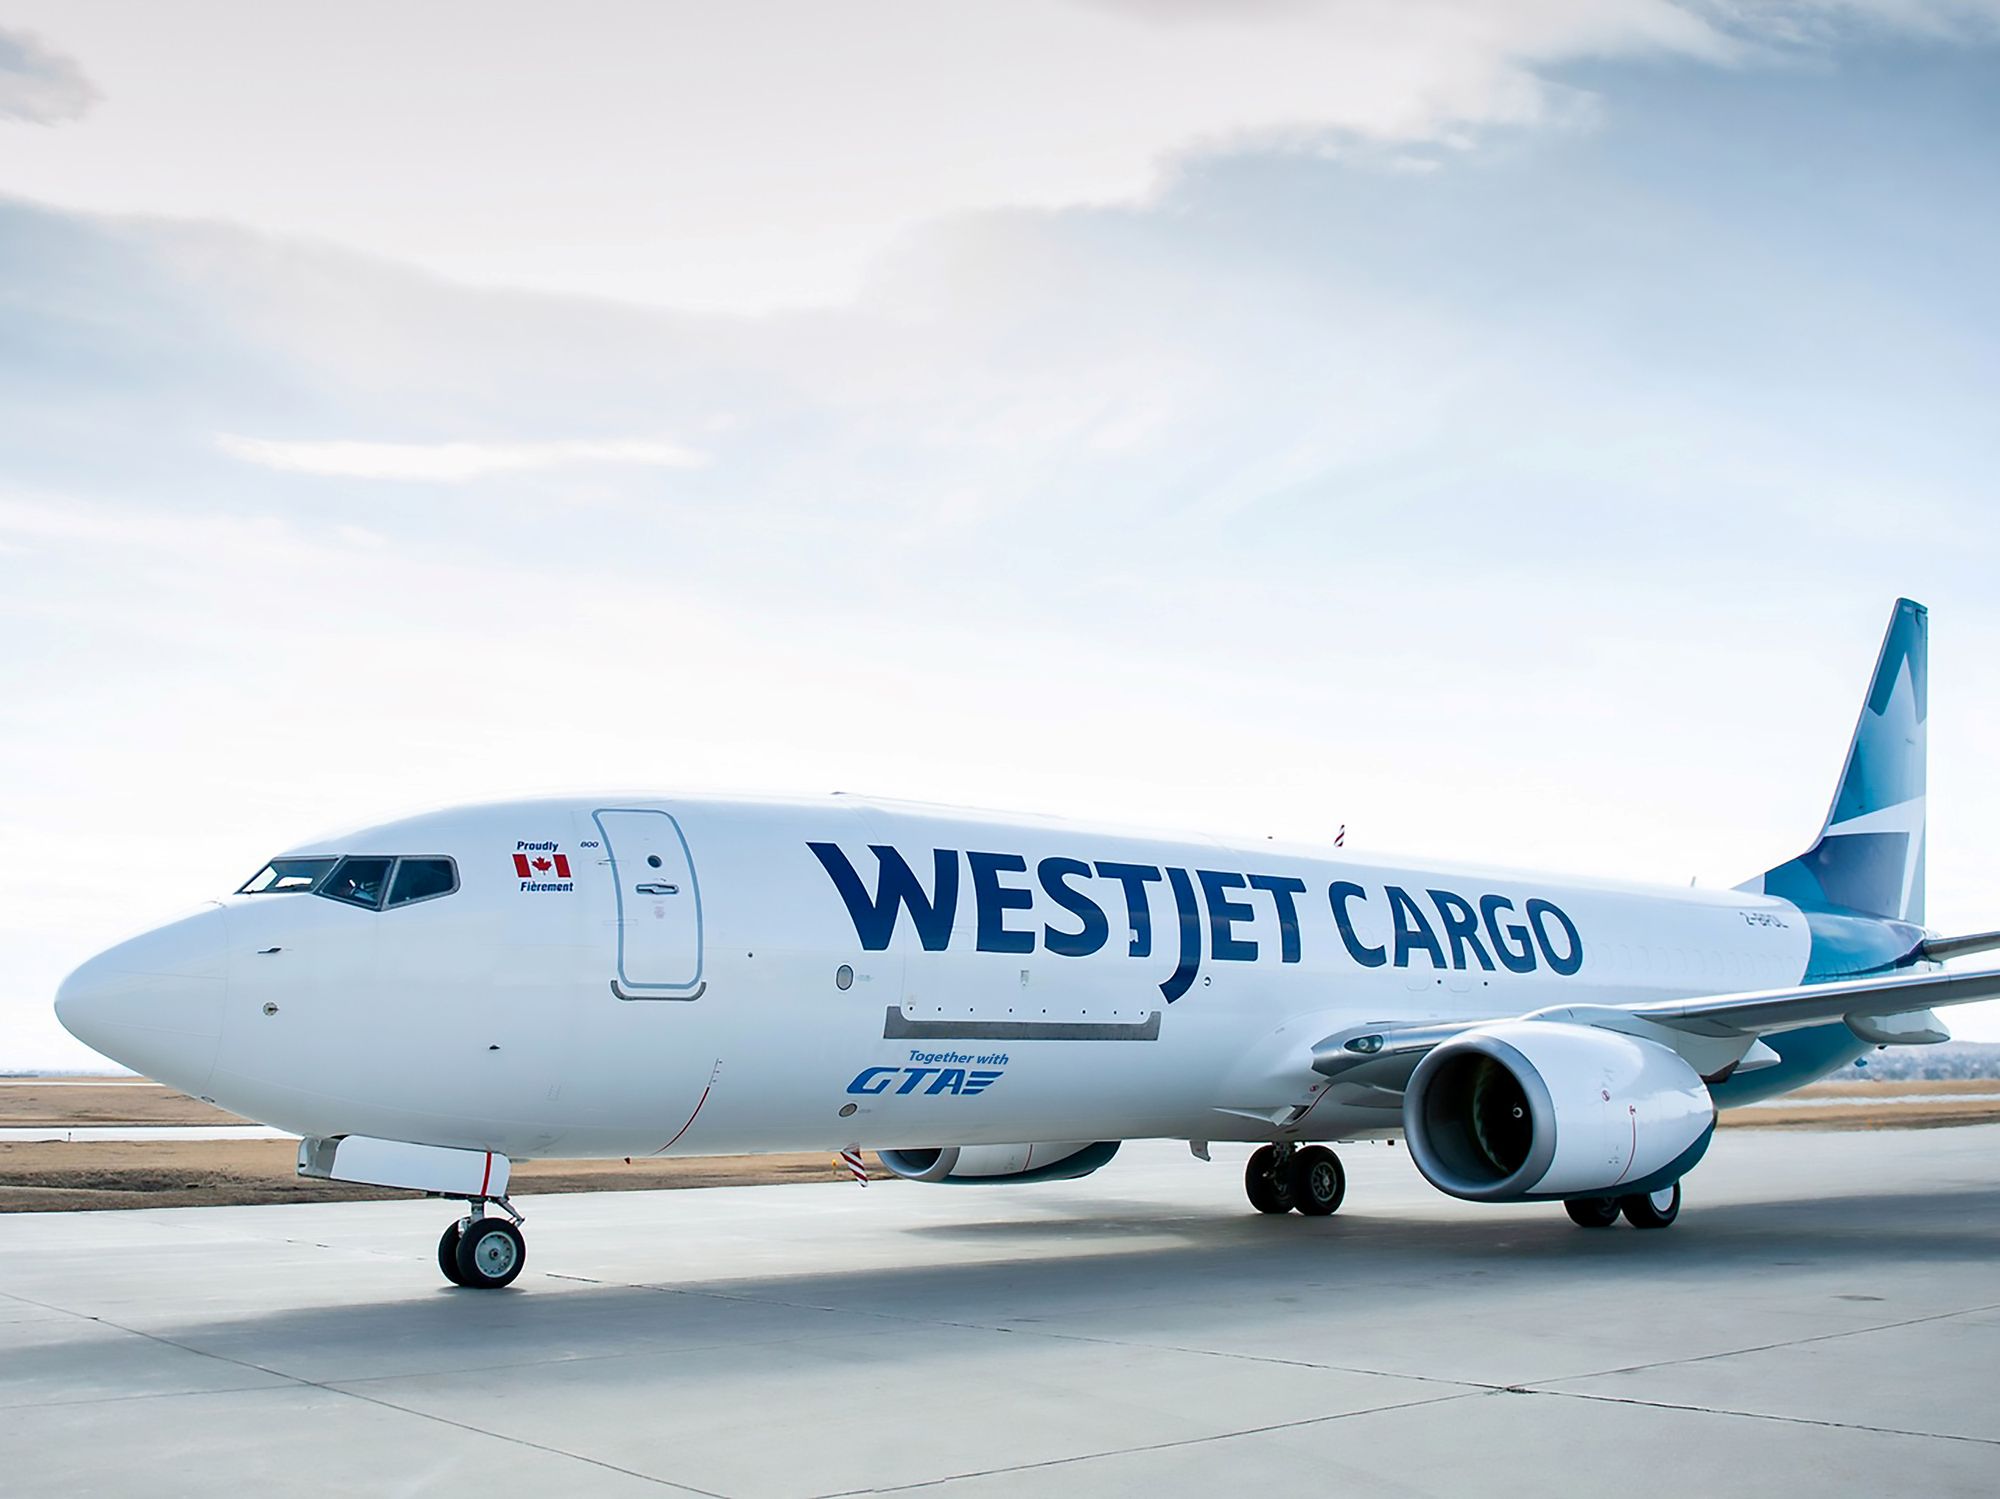 WestJet Cargo Confirms The Launch Of Four Boeing 737800 Freighters On